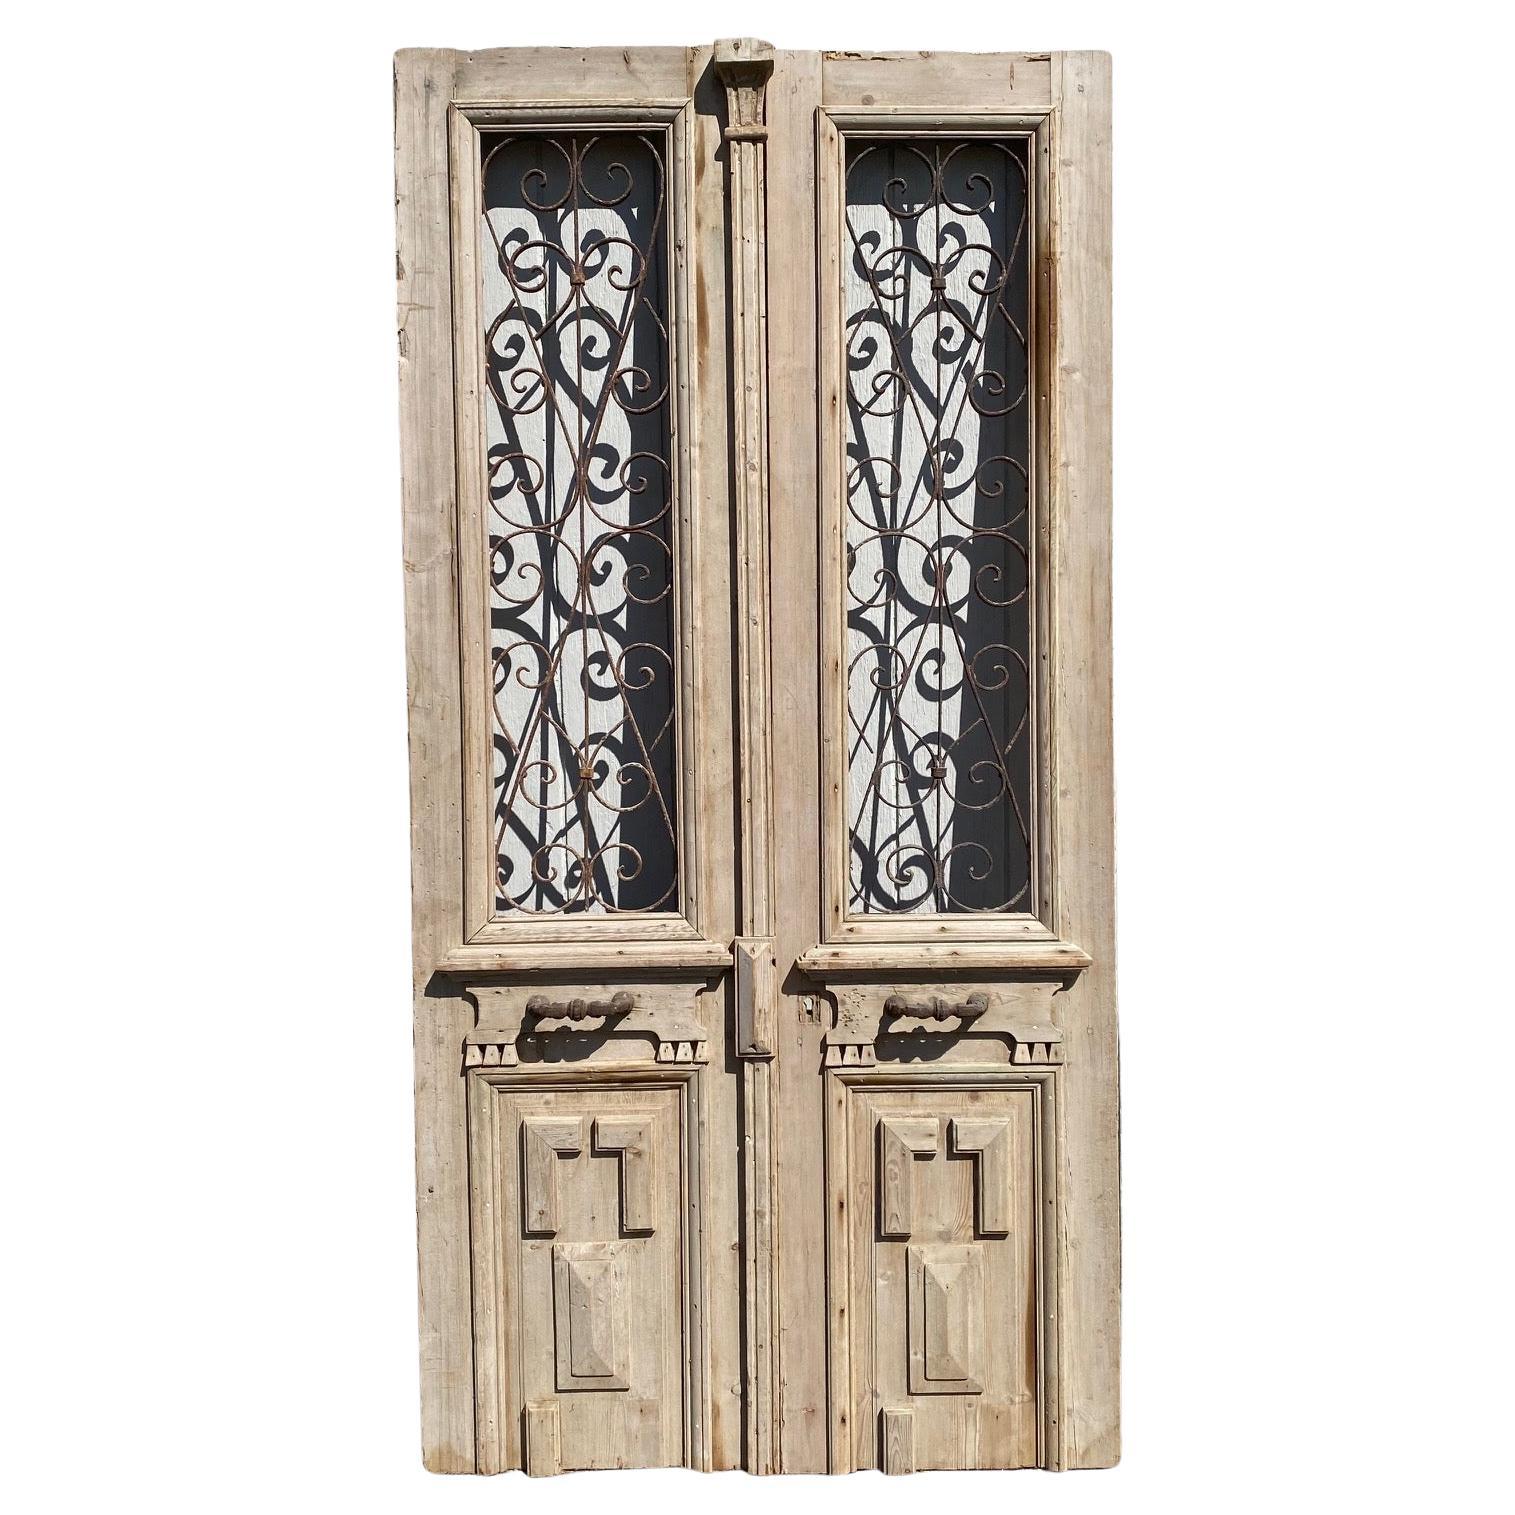 Pair of 19th Century French Doors with Curved Wrought Iron Panels For Sale